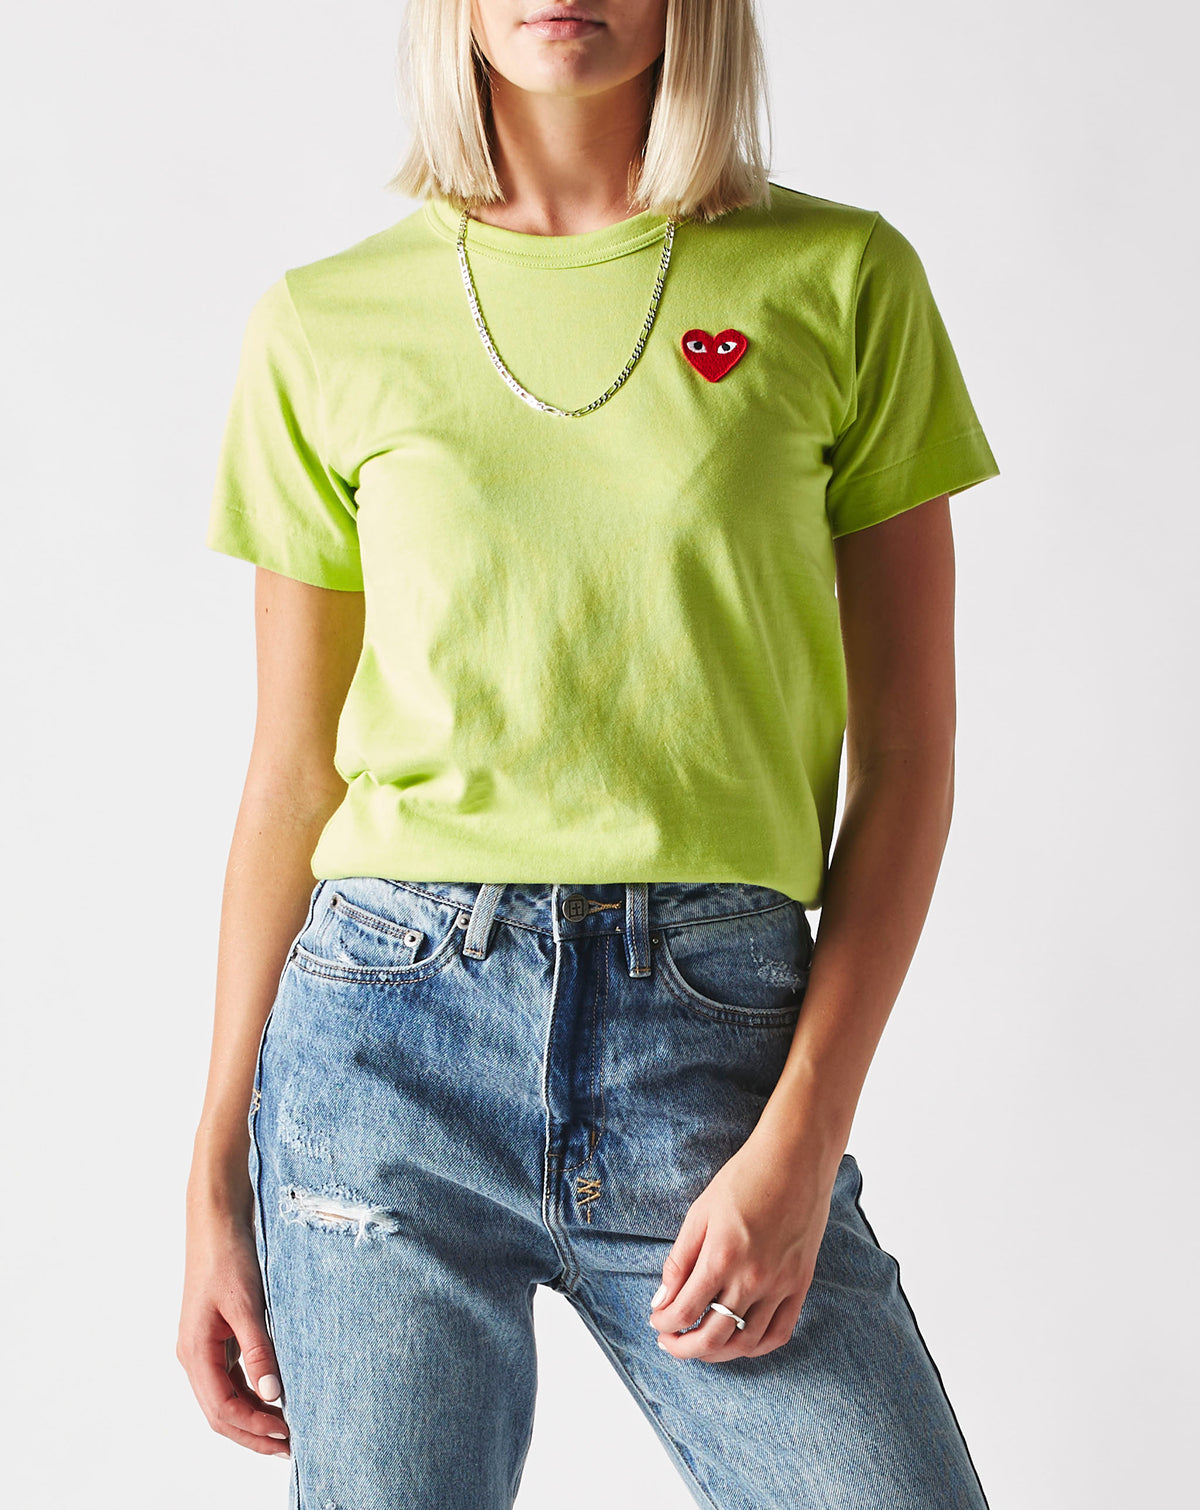 Comme des Garcons PLAY Women's Red Heart T-Shirt - Rule of Next Apparel